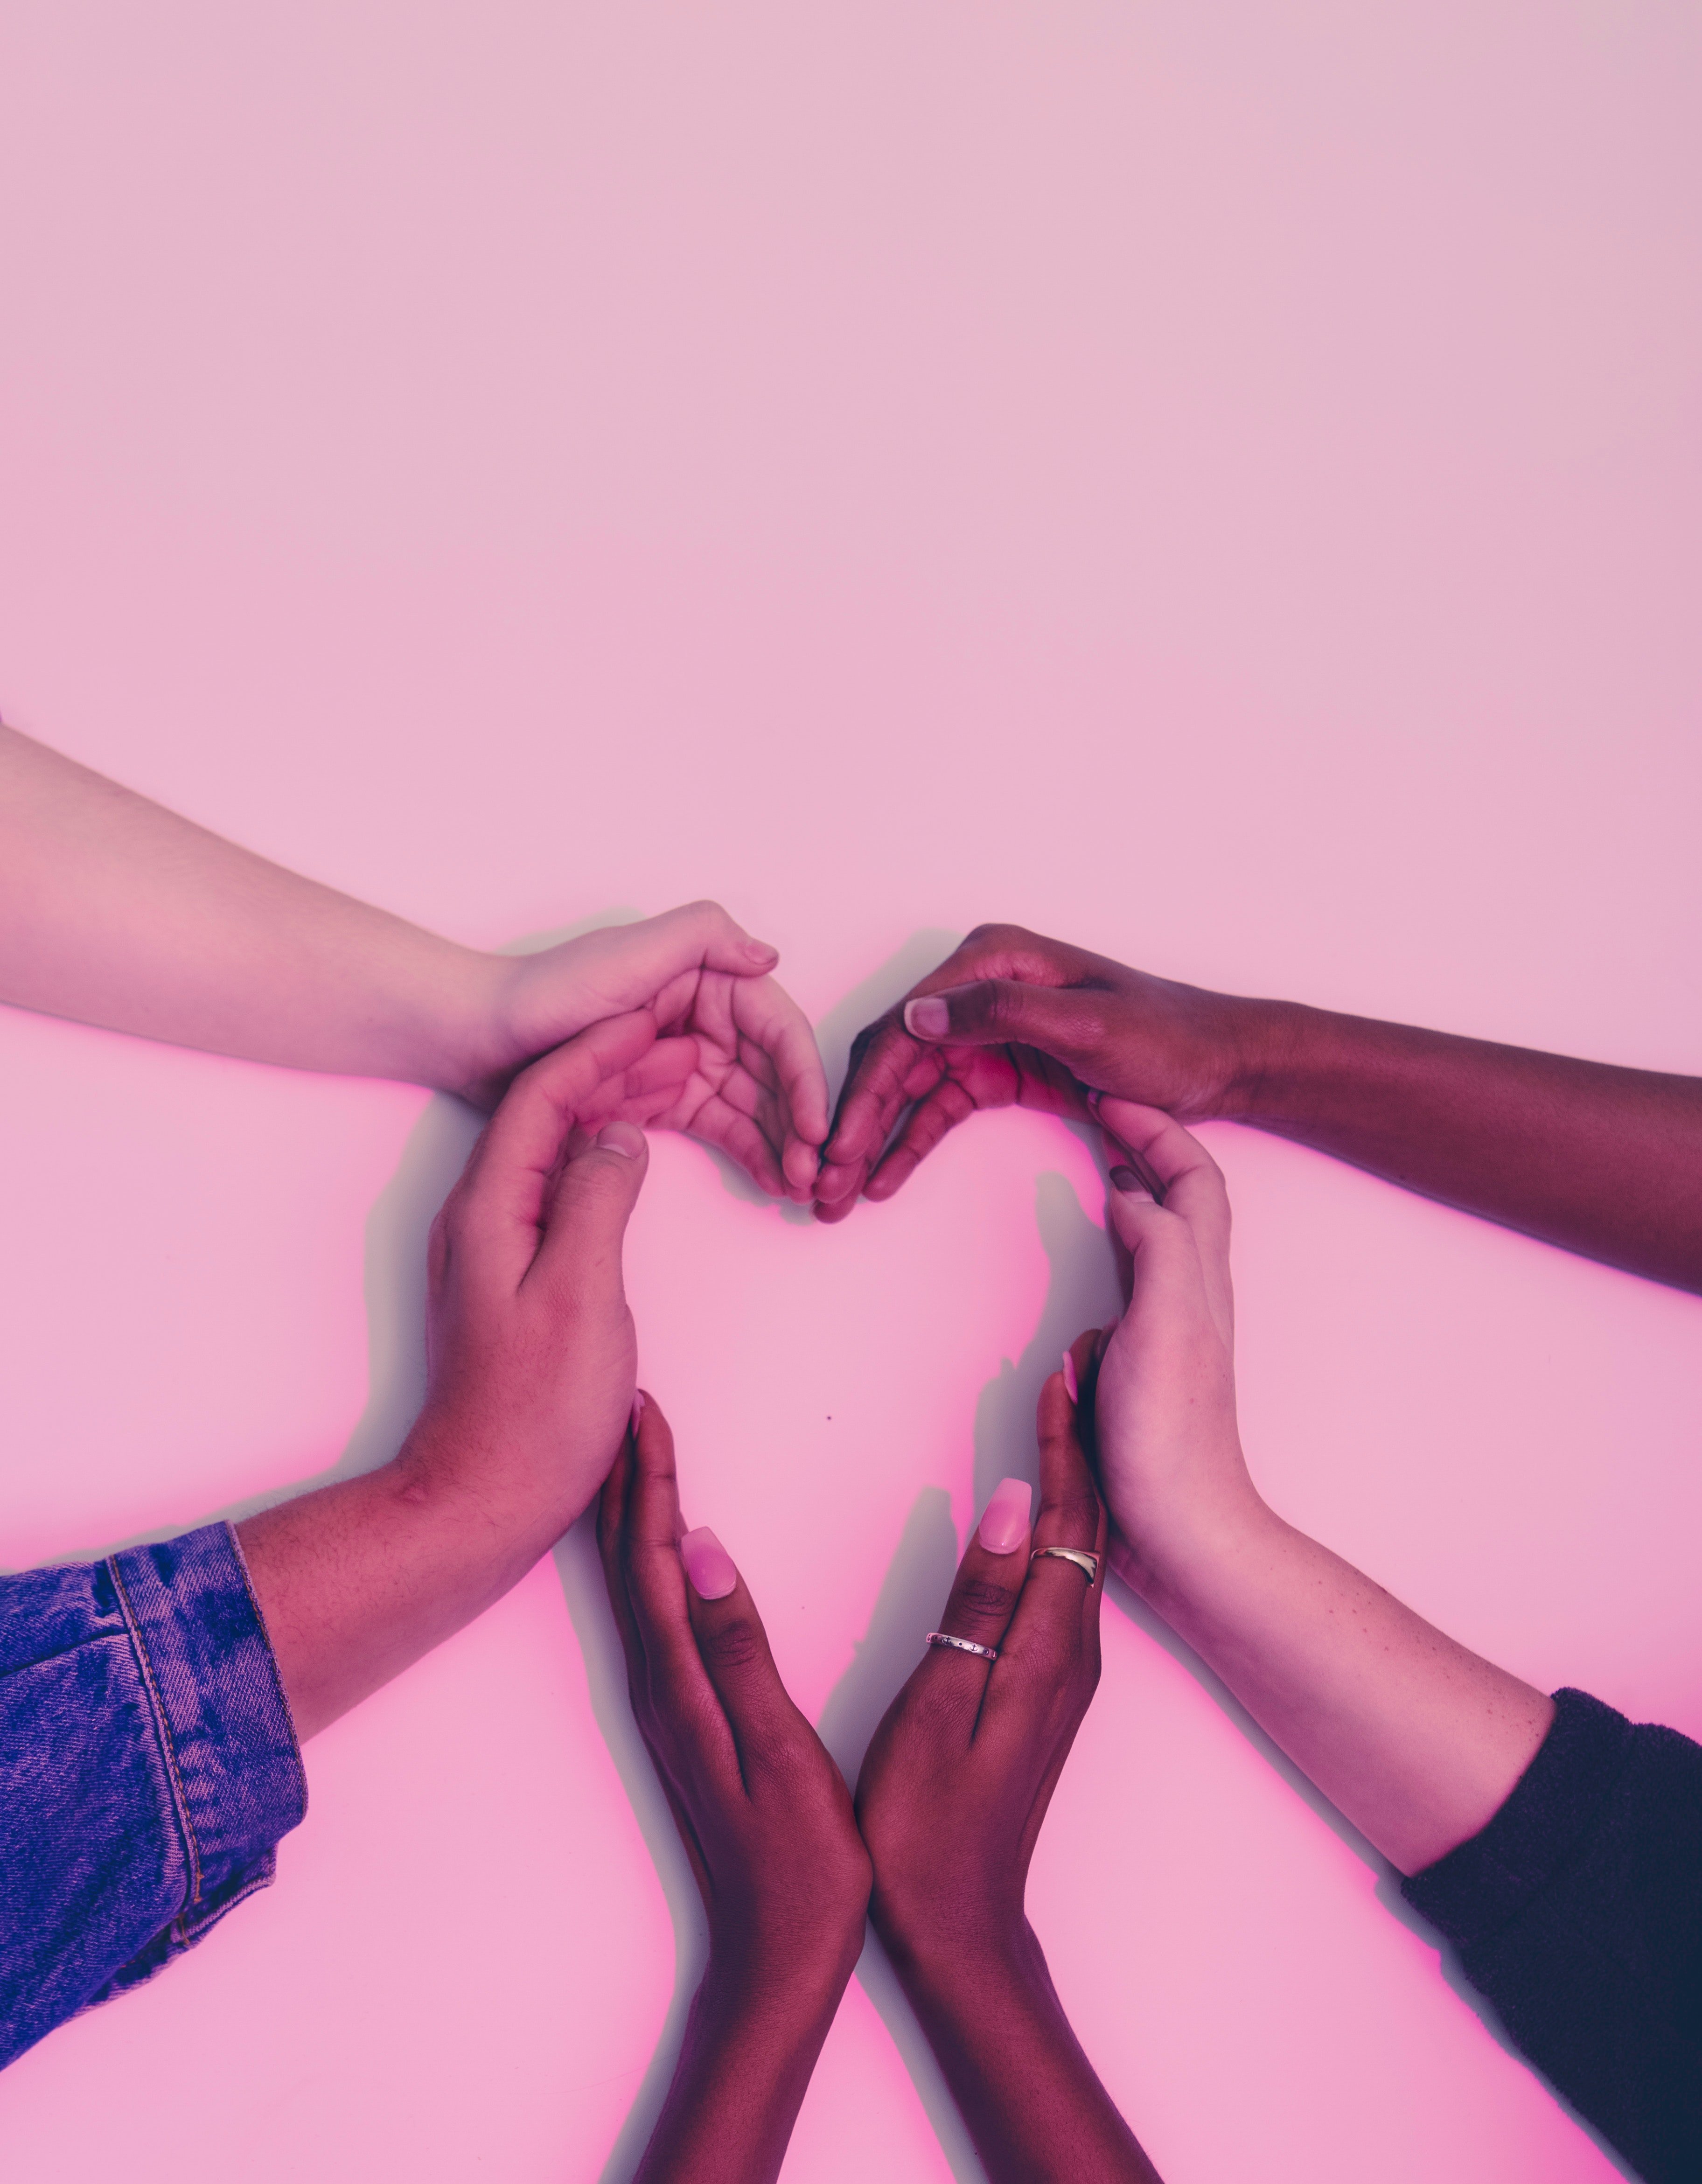 a number of multicultural human hands forming a heart shape against a soft pink background